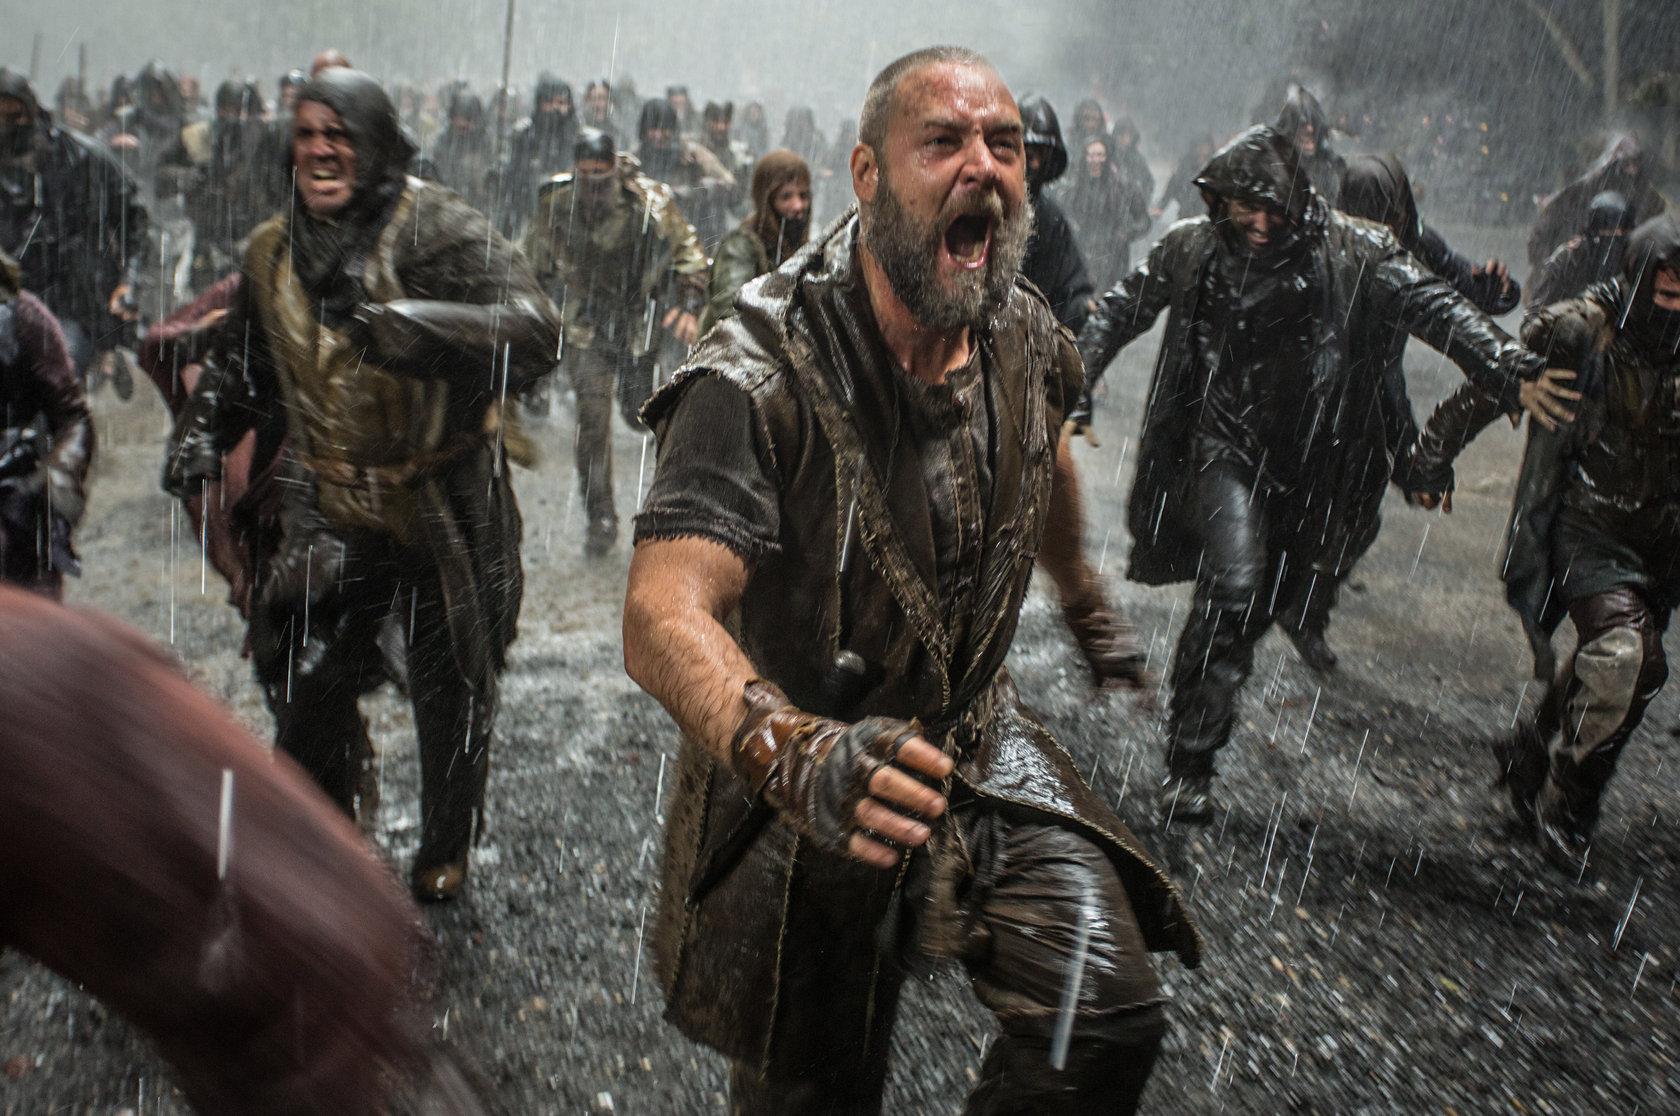 Noah (2014)BLURAY HD NOAH VOMIT GLSR - INSPIRRAL preview 1